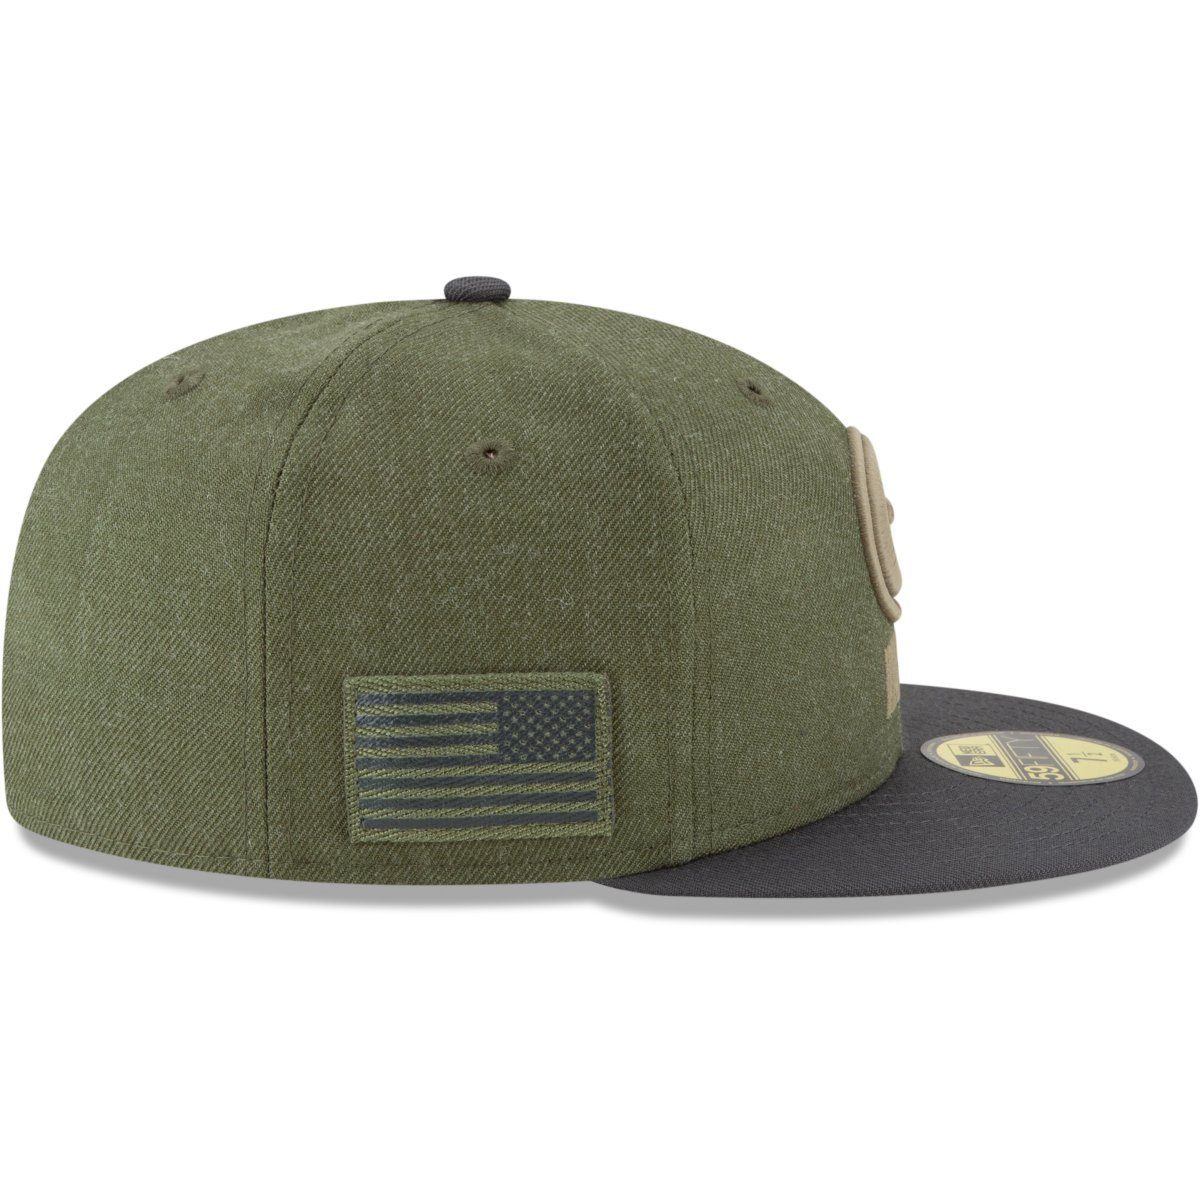 Salute Service Cap Green Bay to New NFL Packers Fitted 59Fifty Era